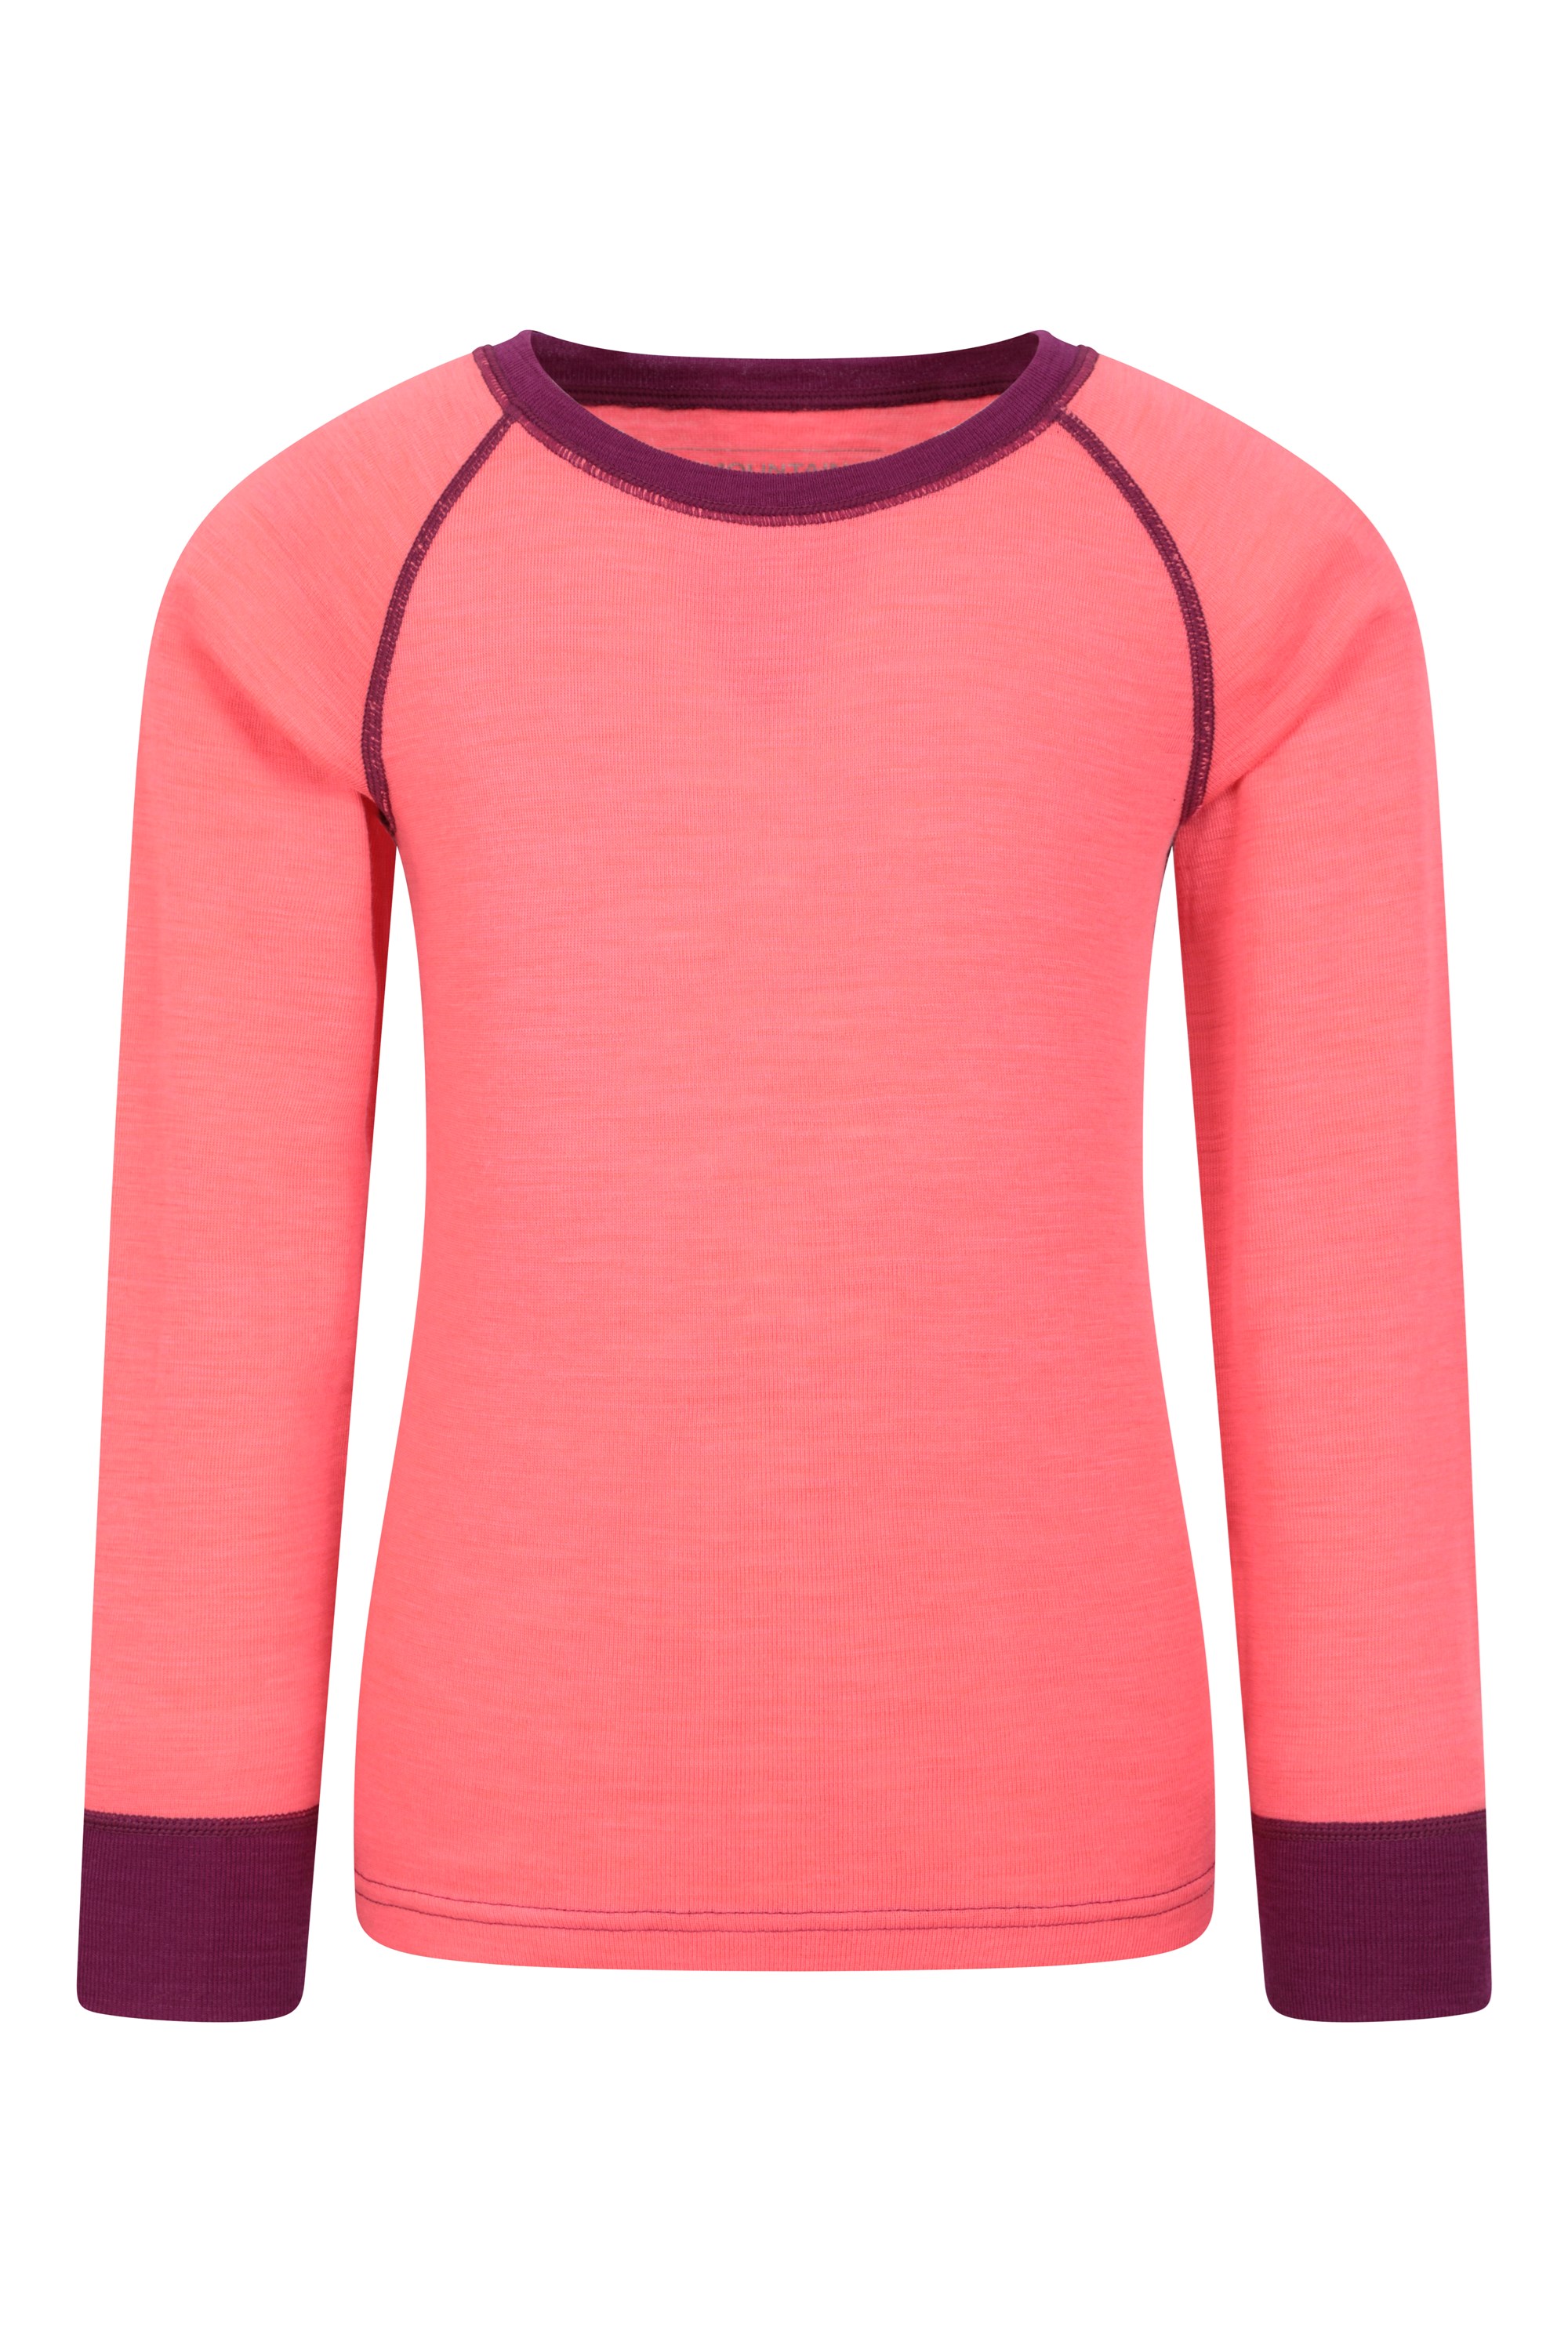  Woolino Merino Wool Base Layer for Kids - Super Soft Kids Long  Sleeve Thermal Top - All Natural Base Layer Shirt - (5-6 Years) - Blush:  Clothing, Shoes & Jewelry